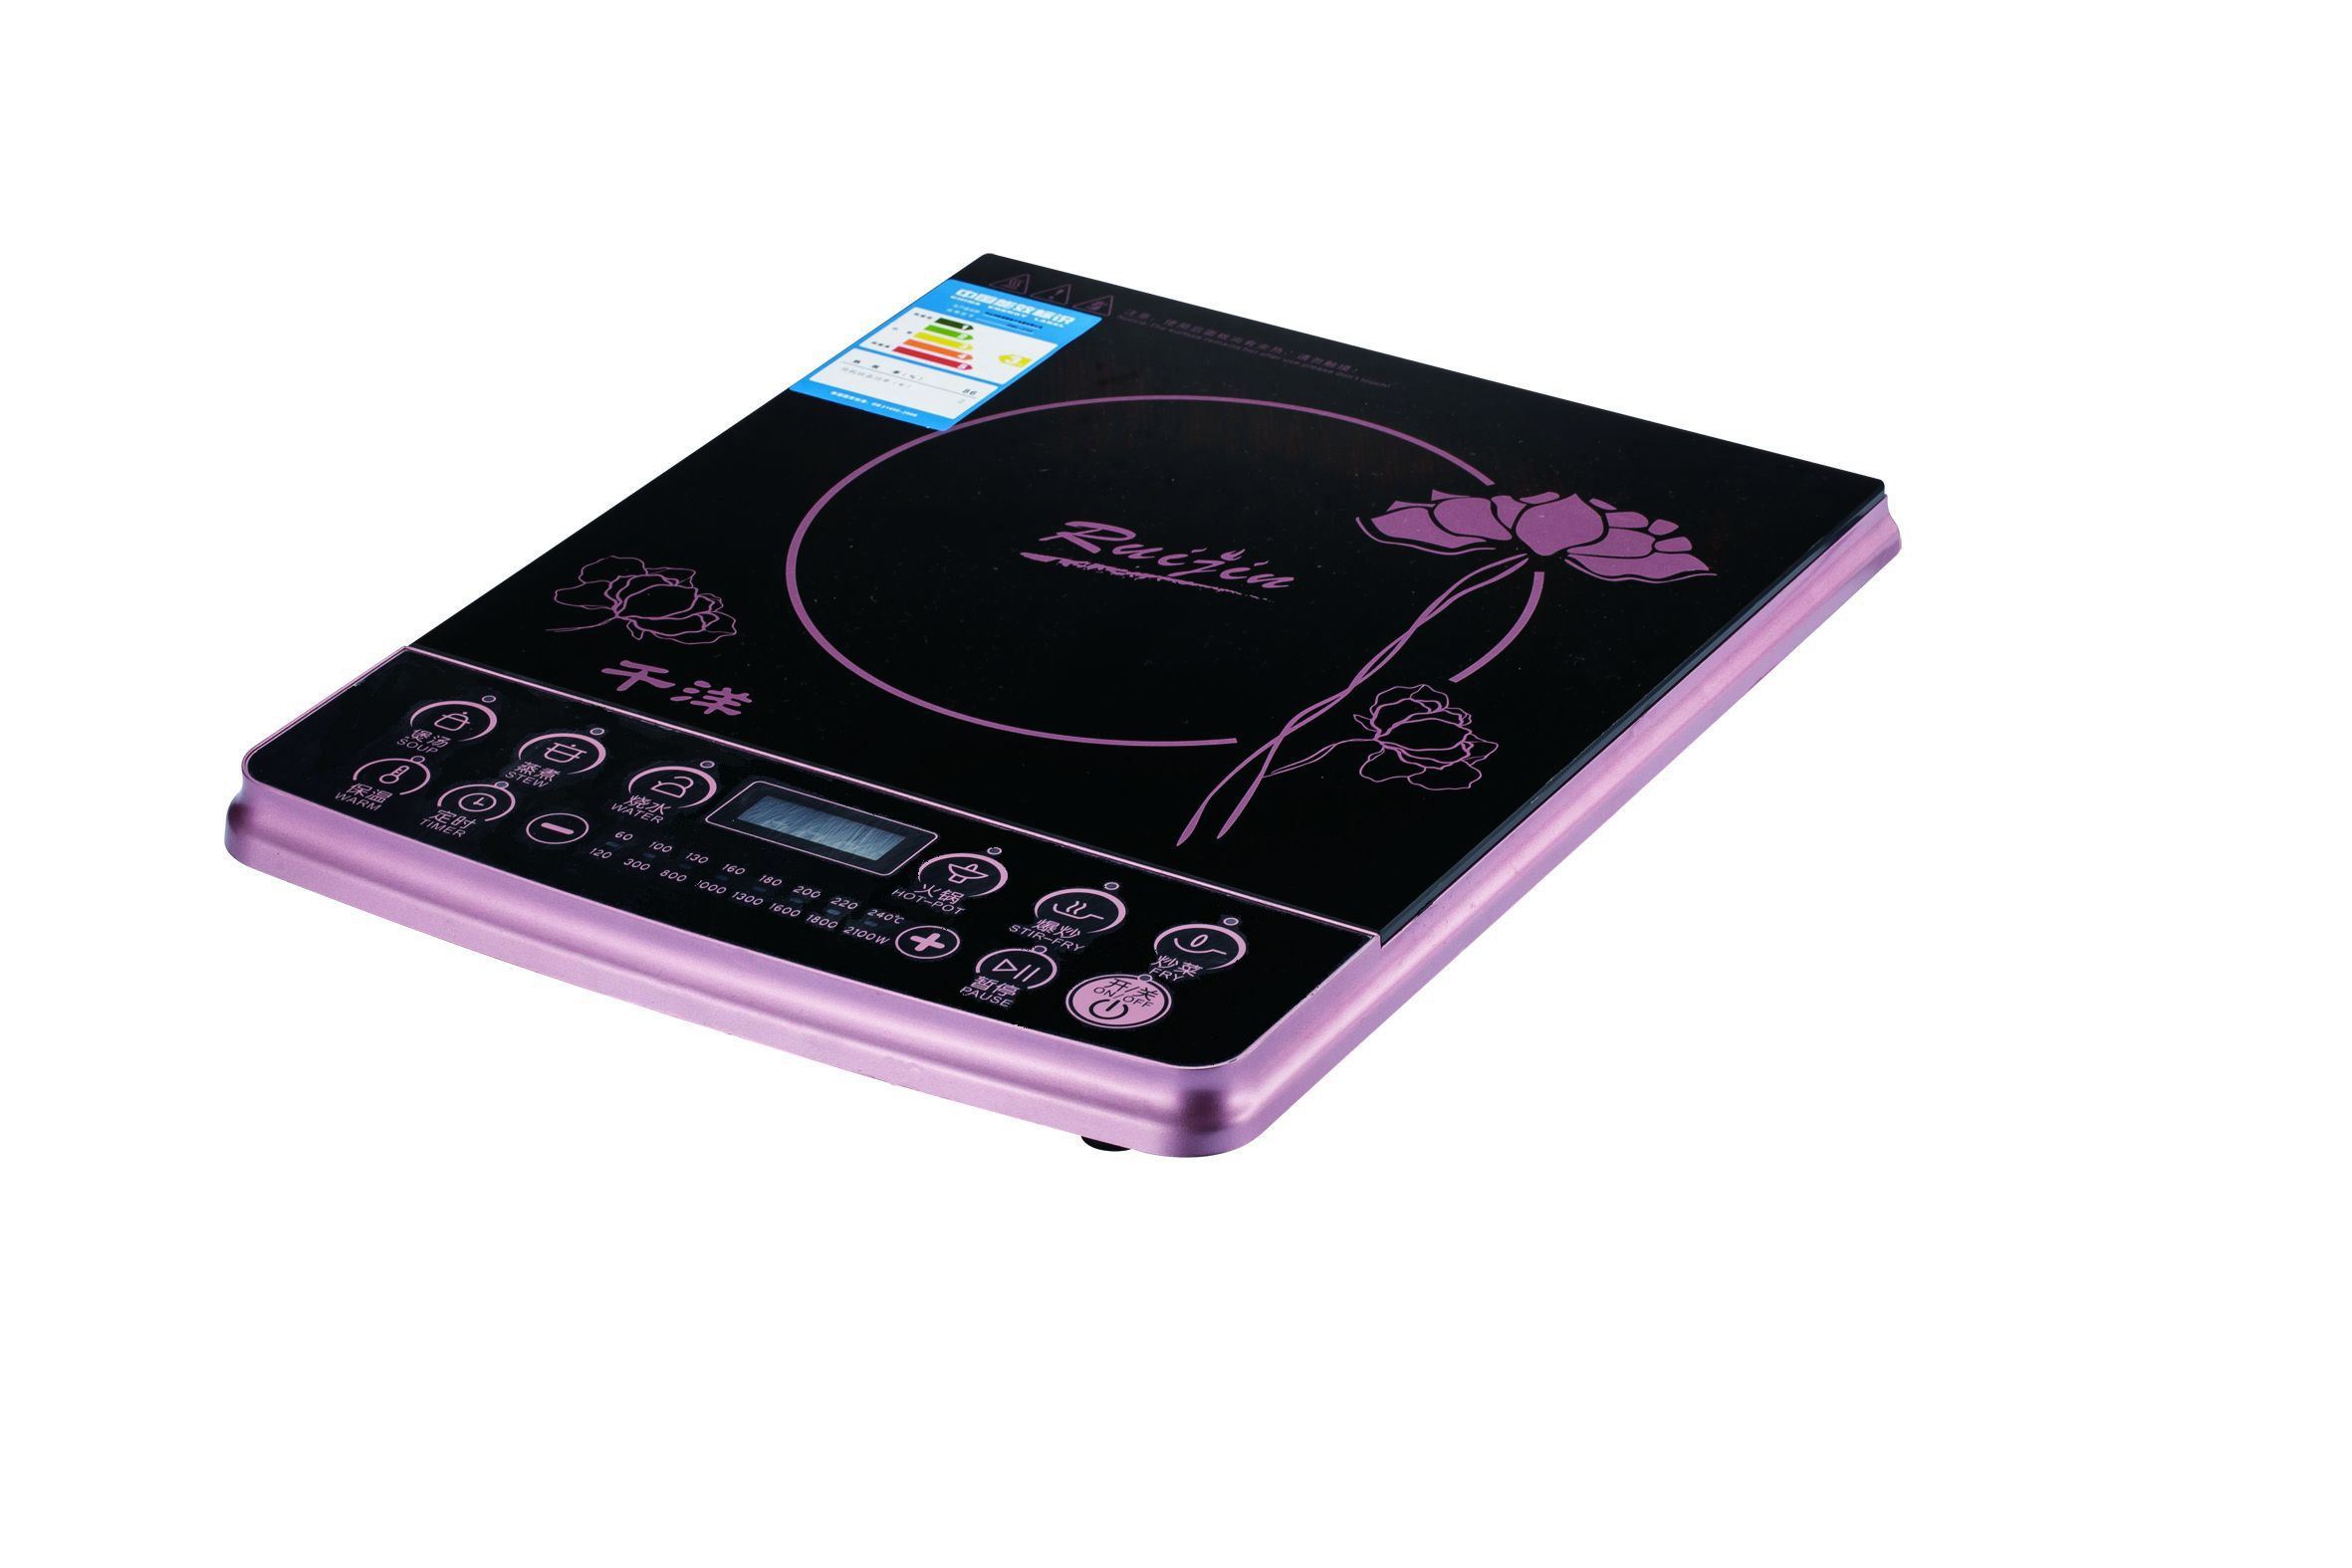 Household Appliance Induction Cooker